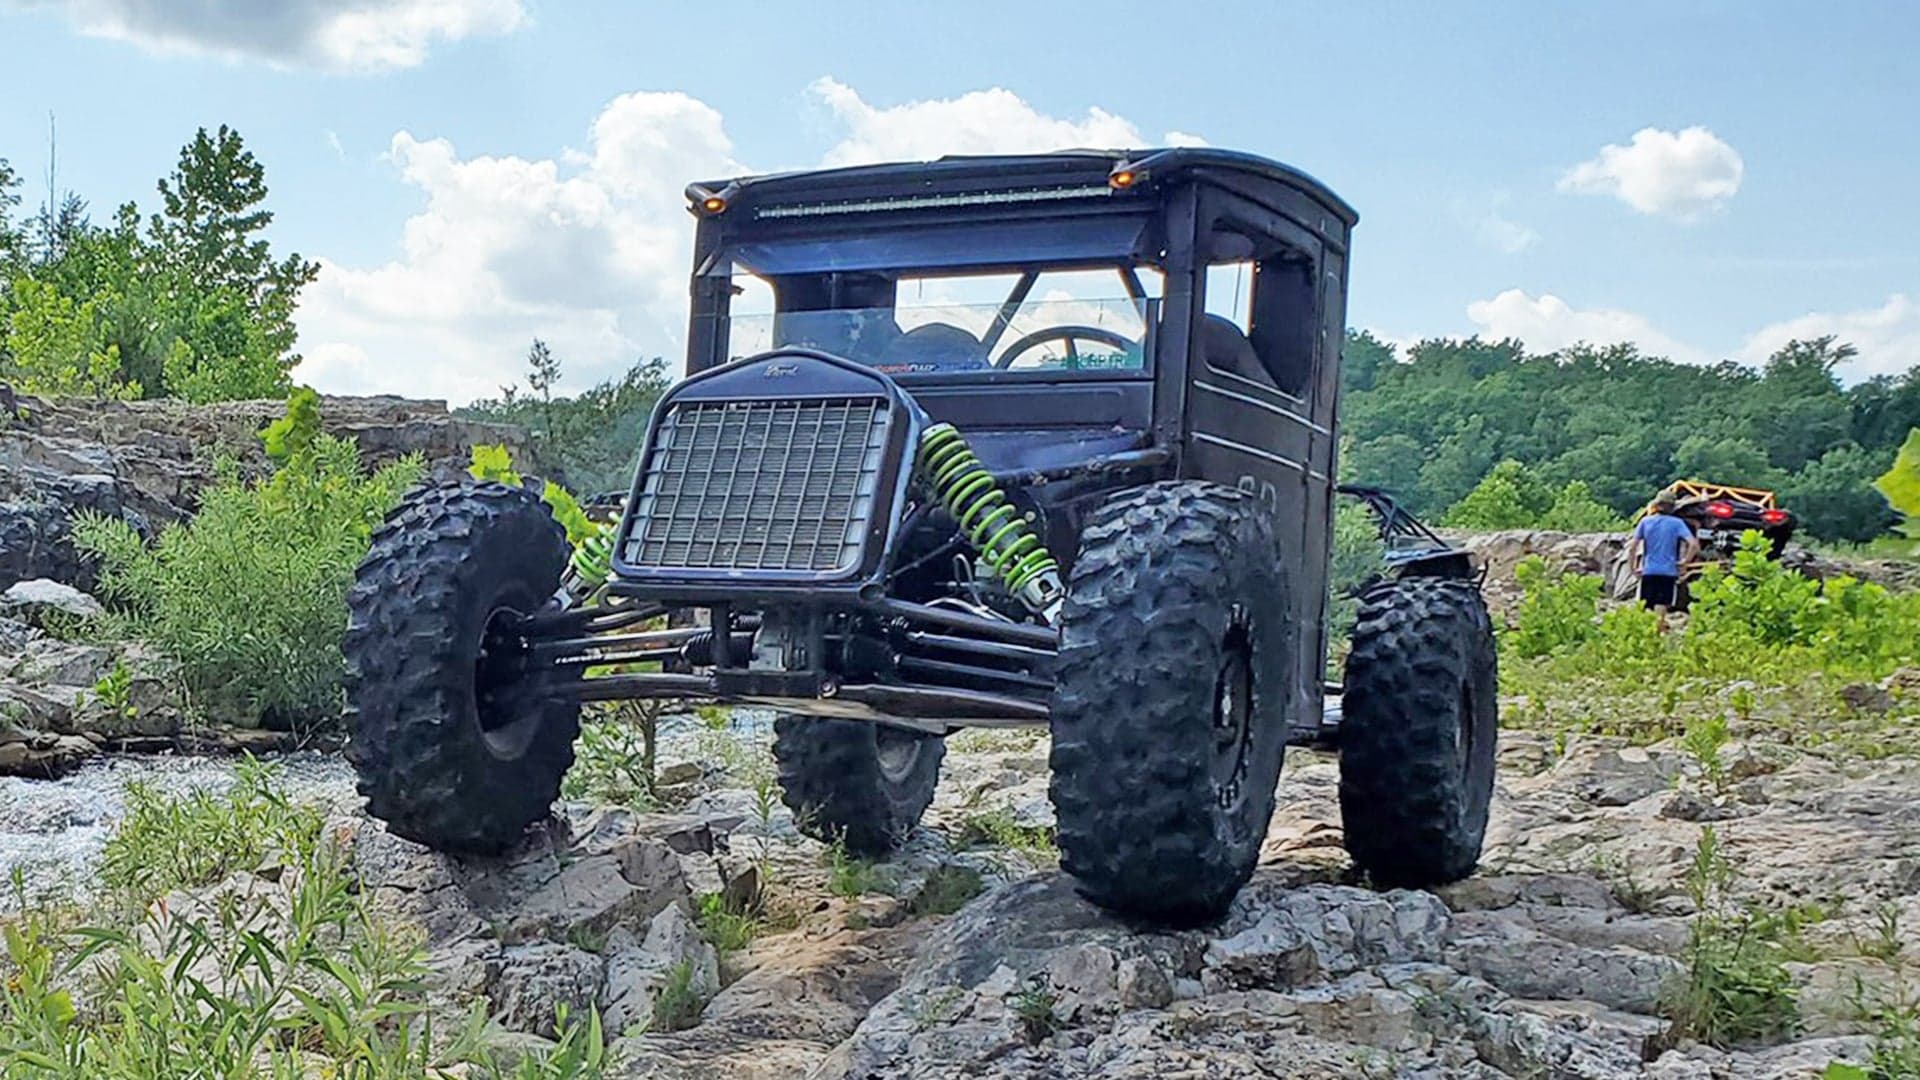 Ford Model T Mashed Up with a Polaris RZR Is a Homemade Off-Road Masterpiece